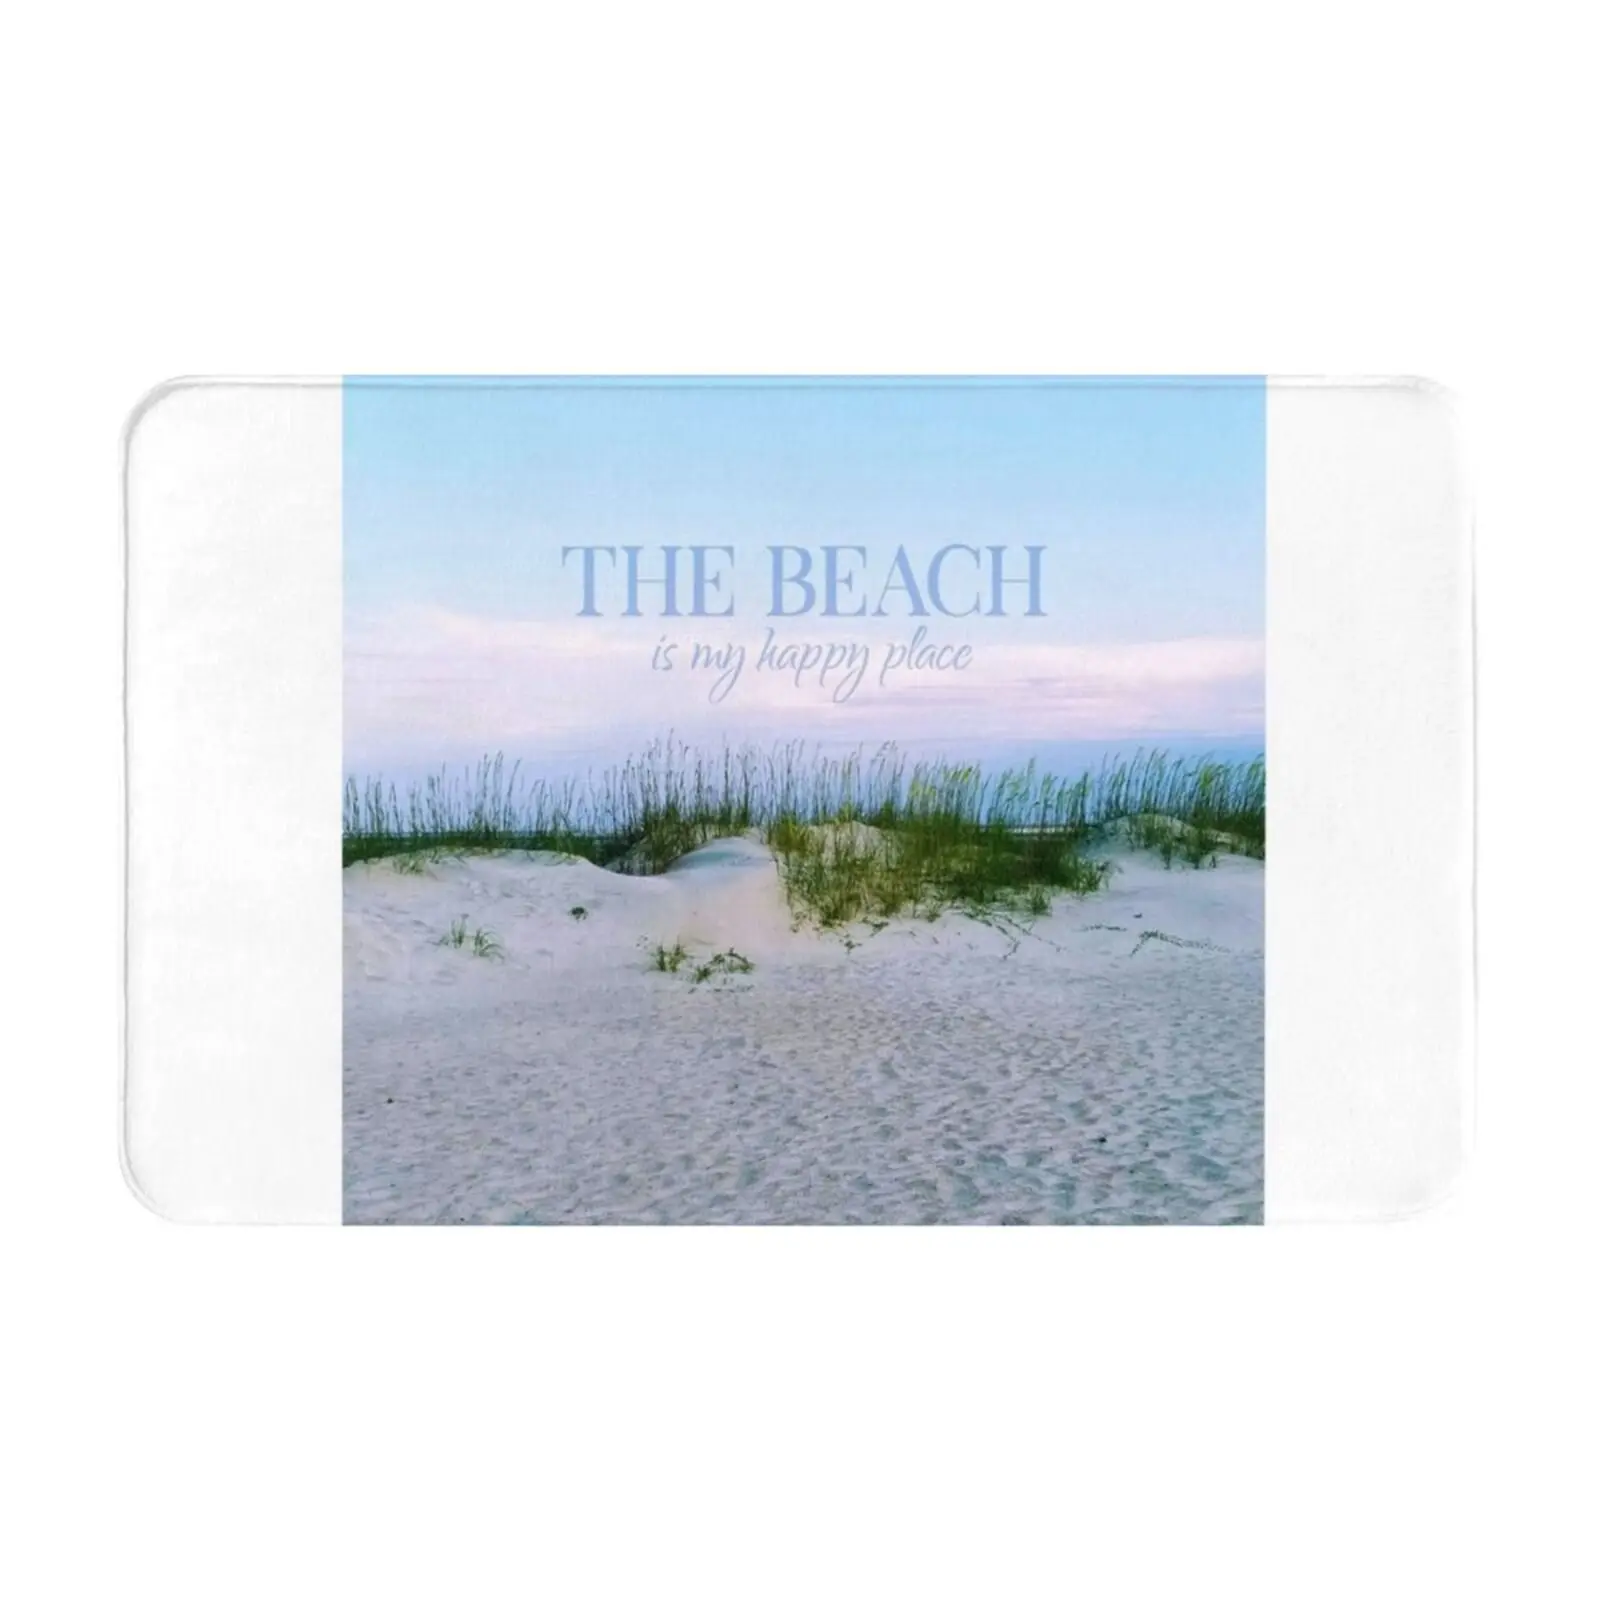 The Beach Is My Happy Place 3 Sizes Home Rug Room Carpet Sand The Beach Is My Happy Place Sea Grasses Sunset Sunrise Tybee